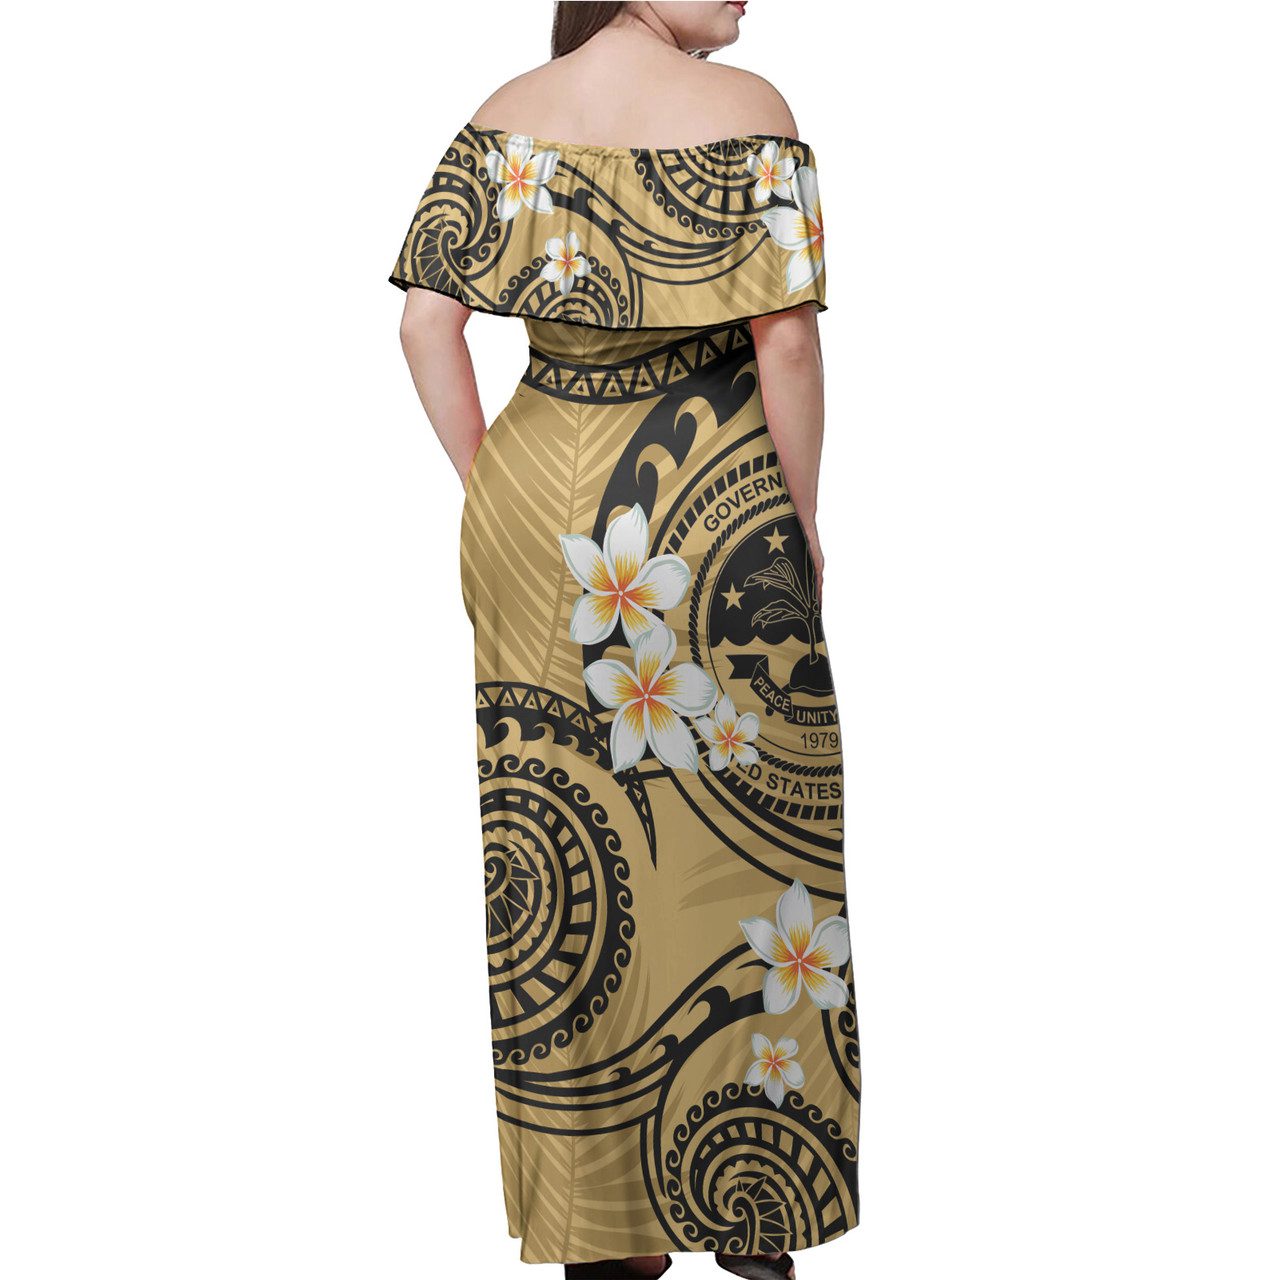 Federated States Of Micronesia Off Shoulder Long Dress Plumeria Flowers Tribal Motif Yellow Version